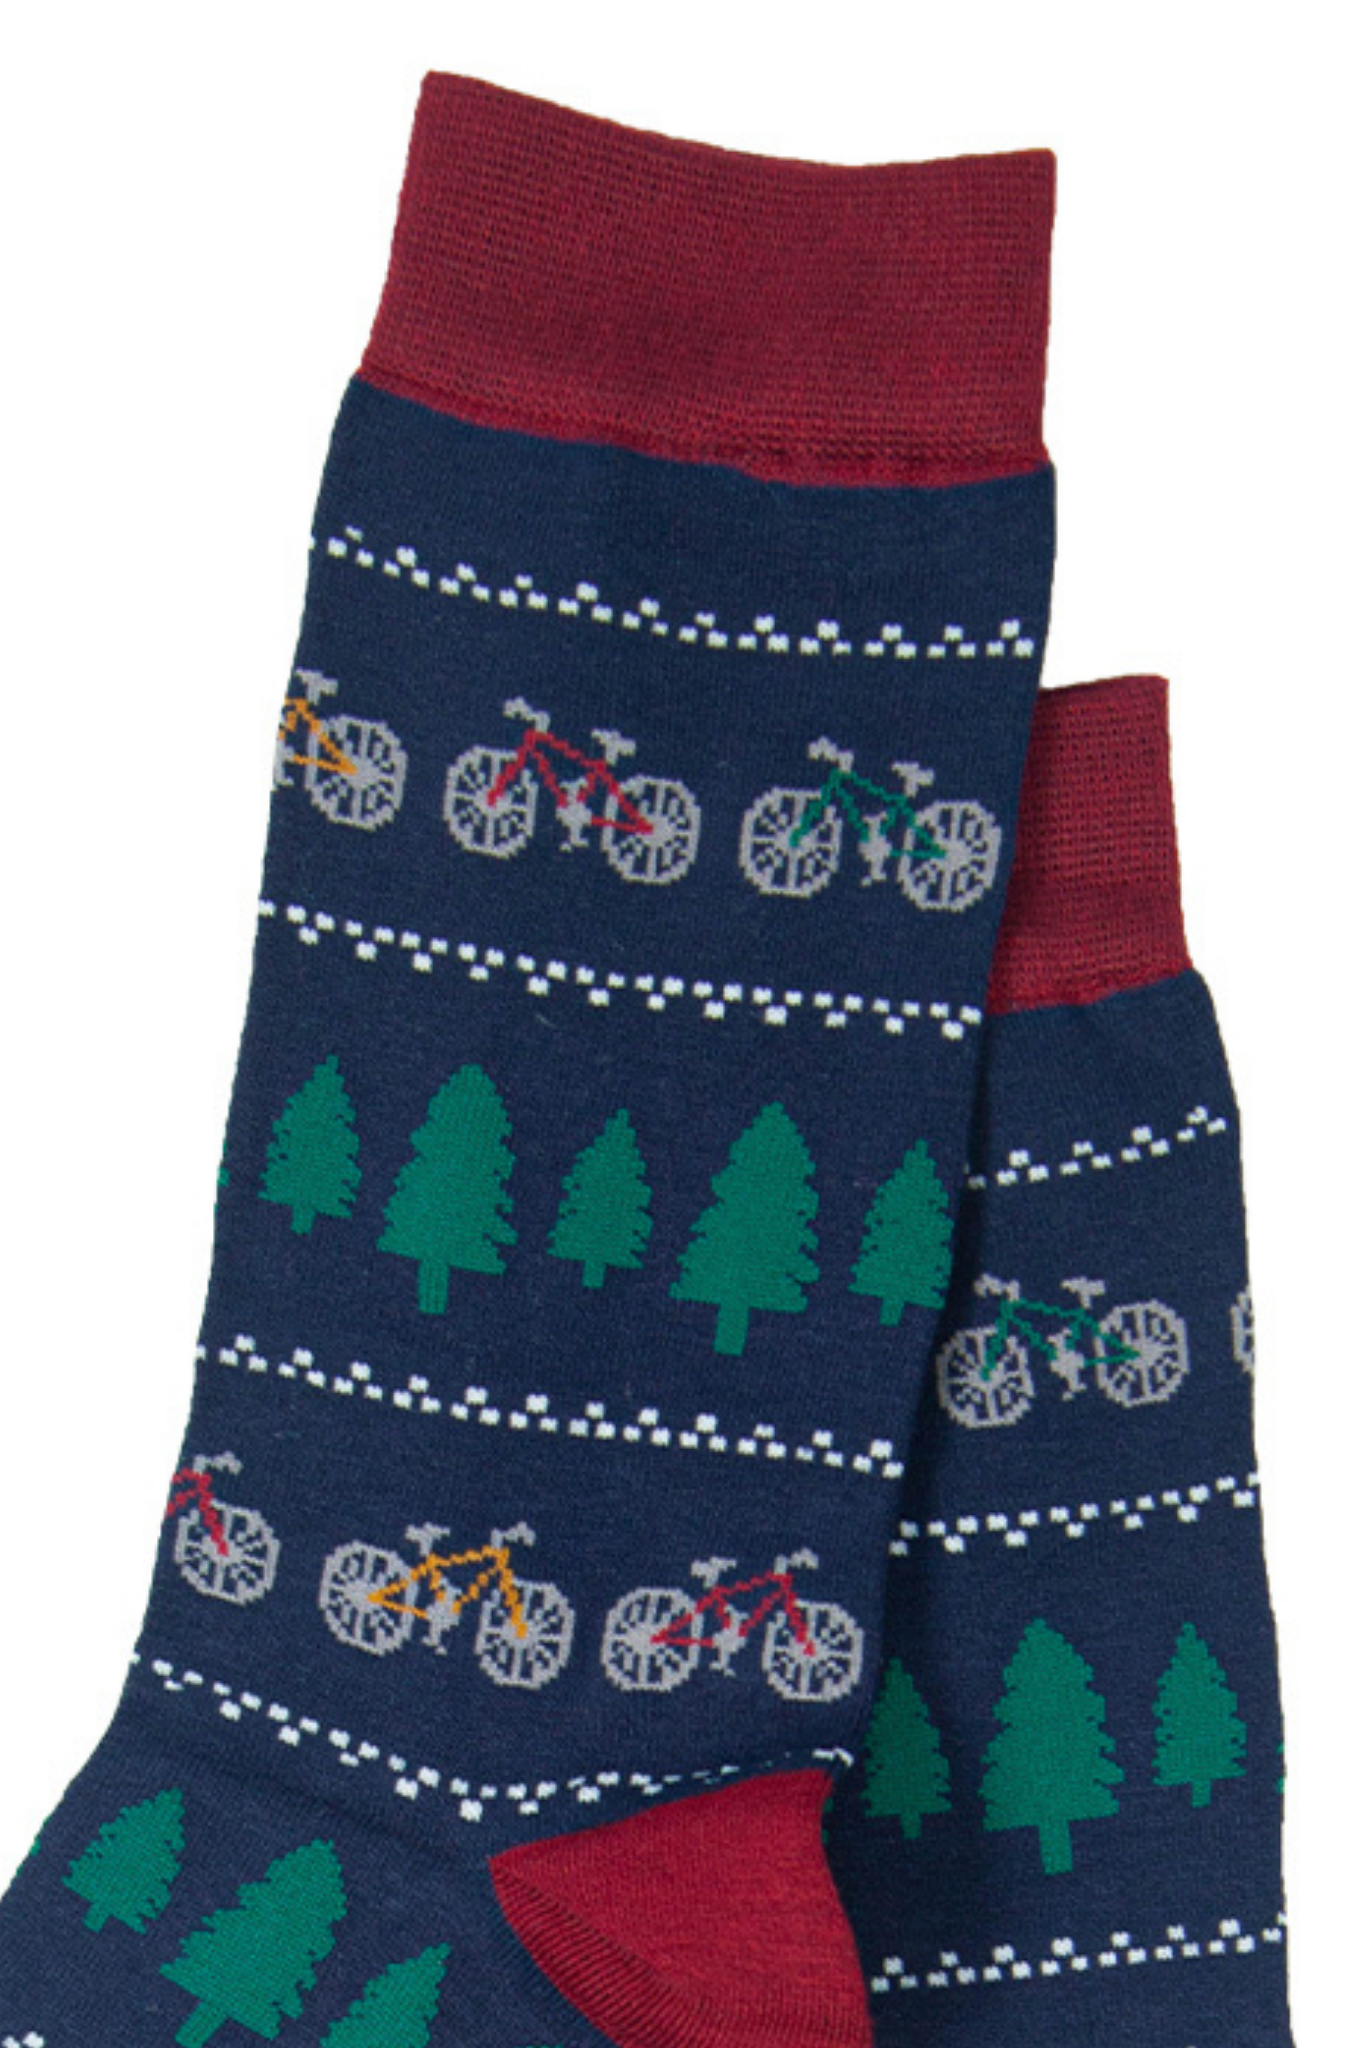 close up of the fair isle style print with trees and bicycles